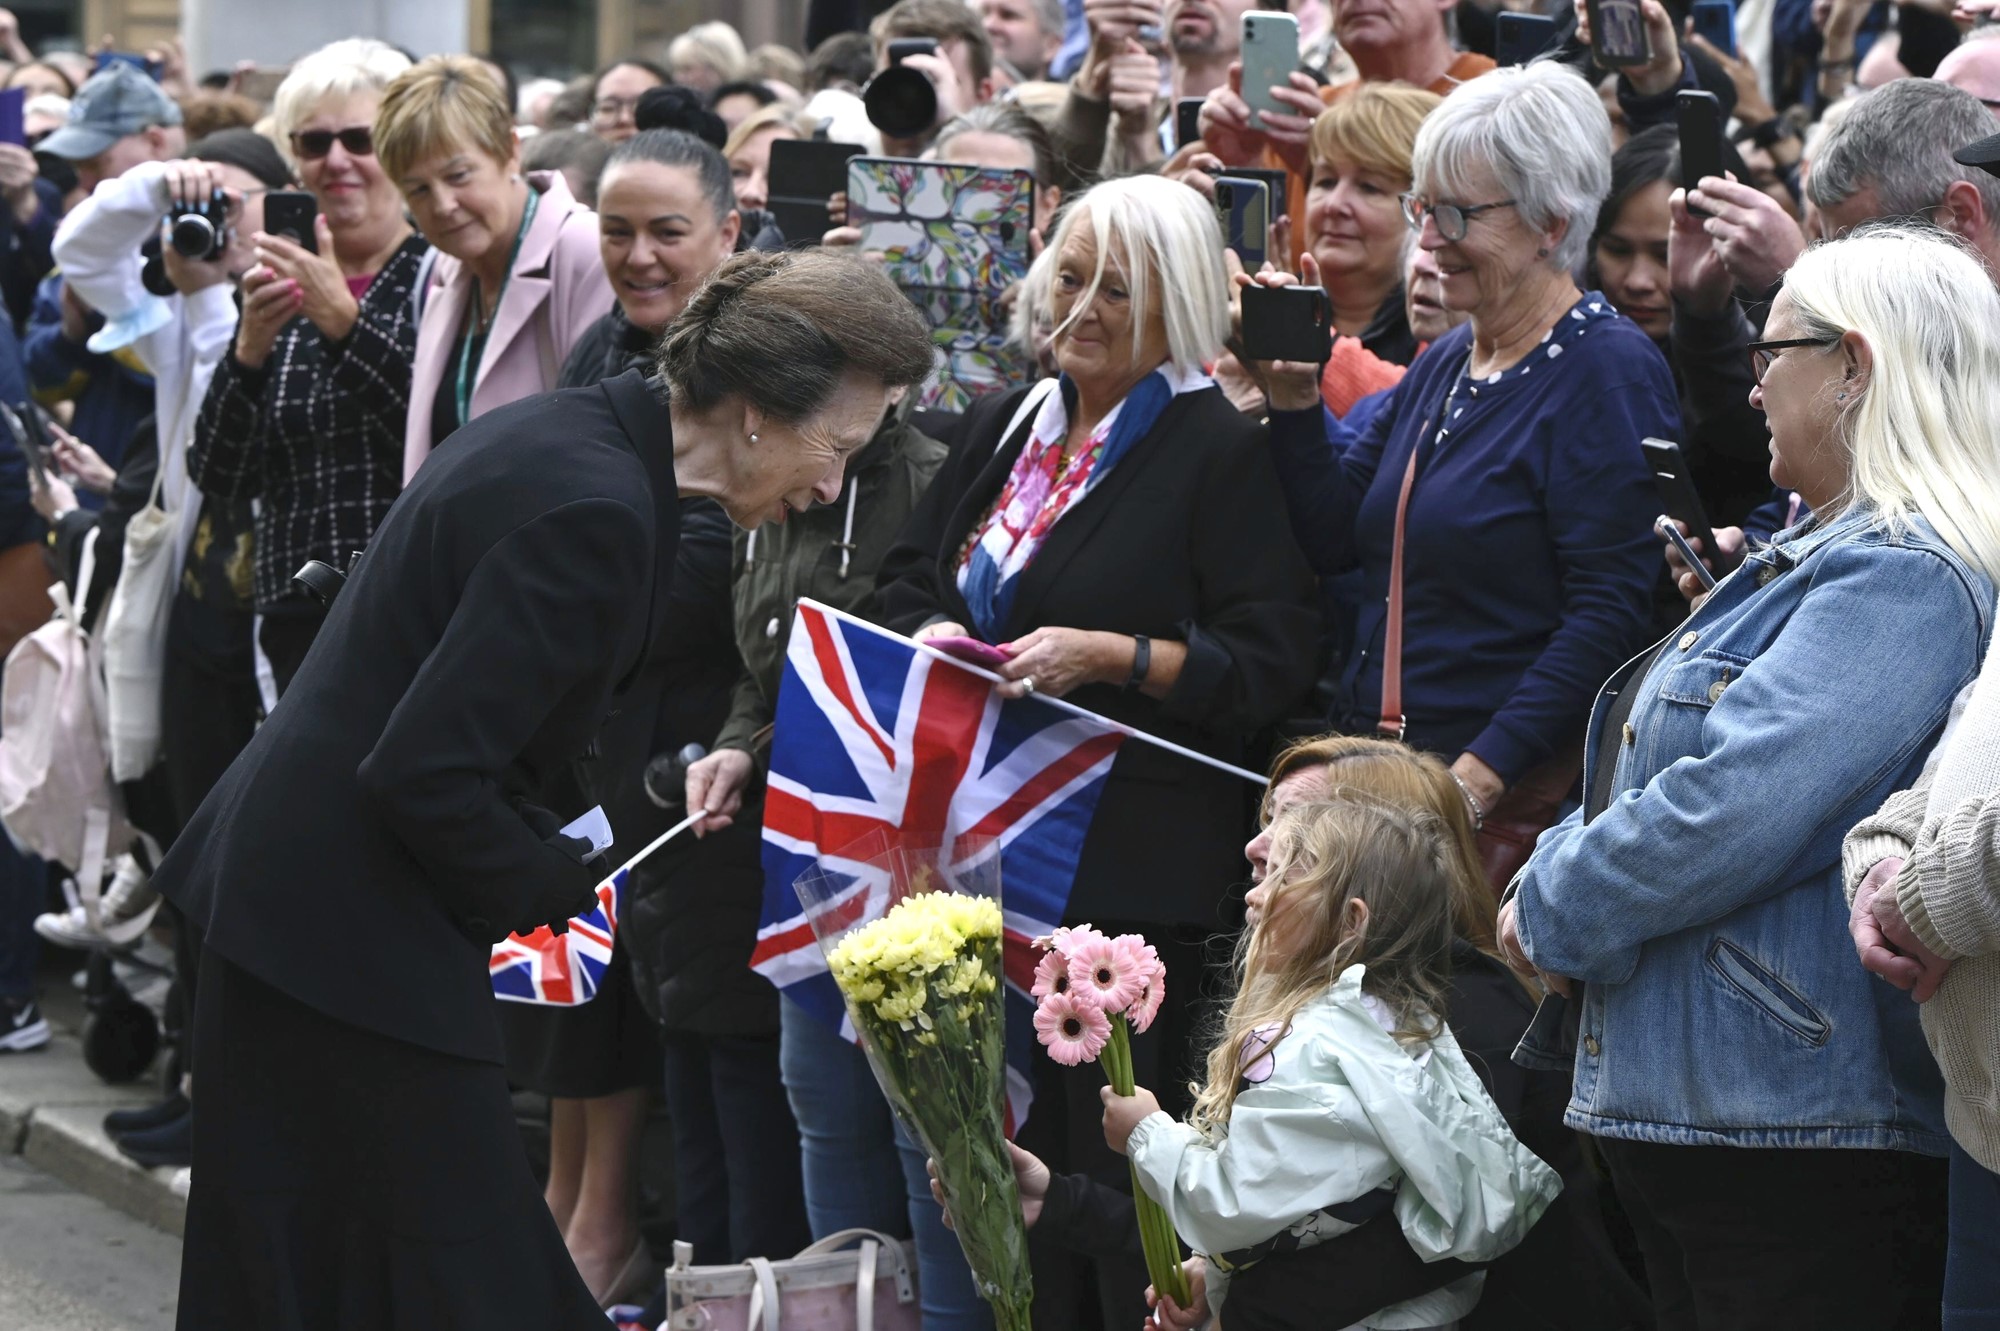 Princess Anne speaking to a child in a crowd